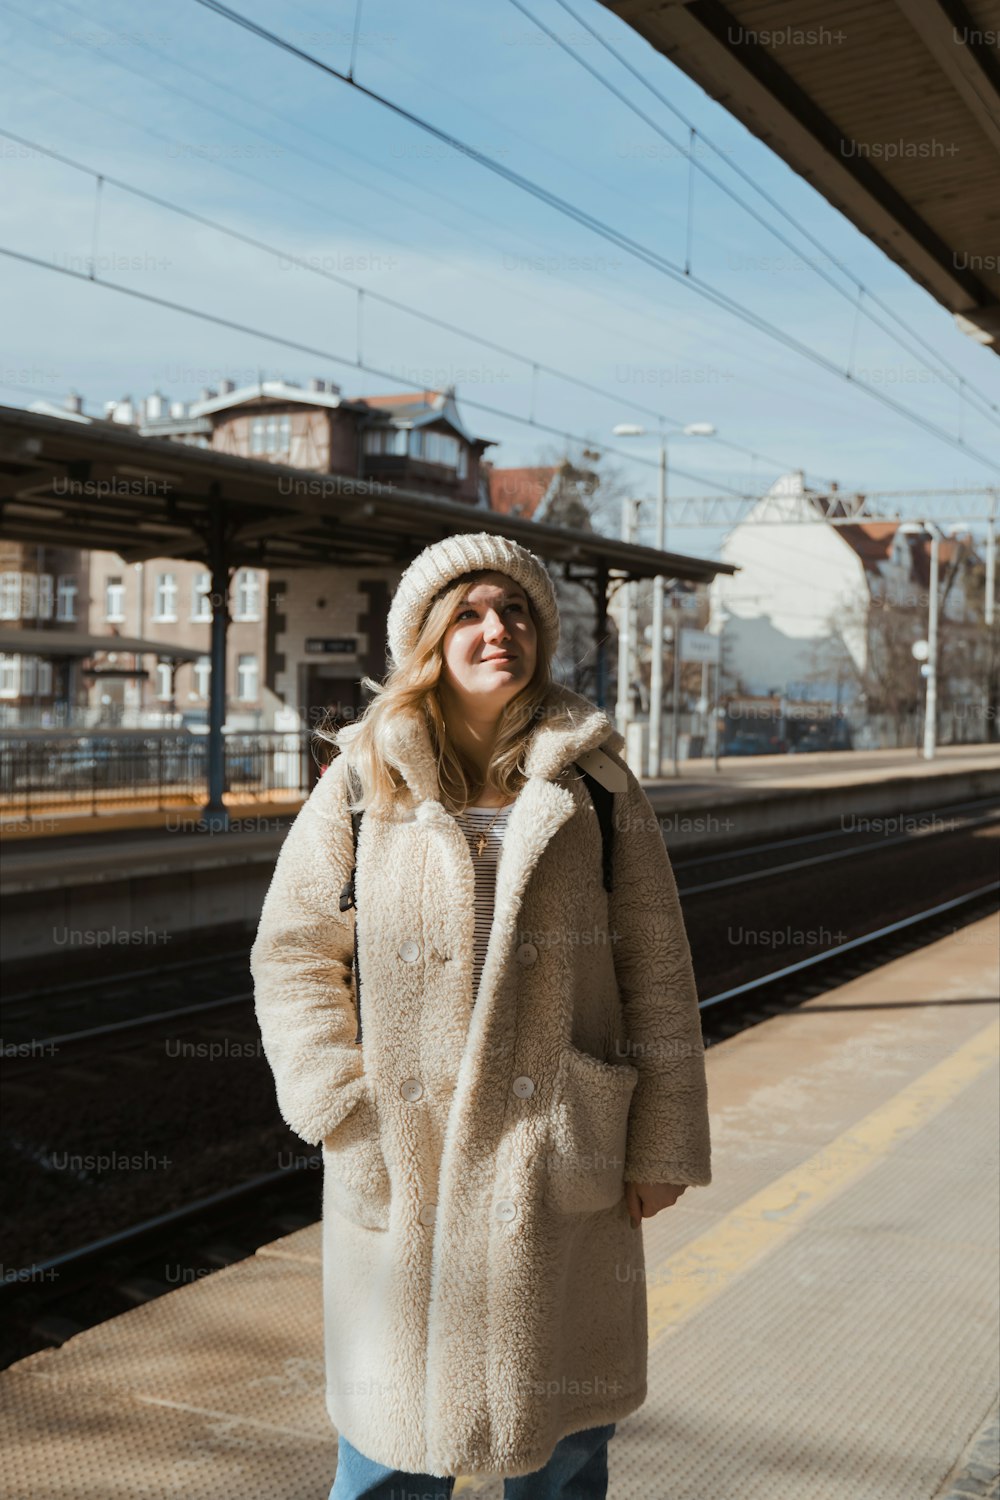 a woman is standing on a train platform